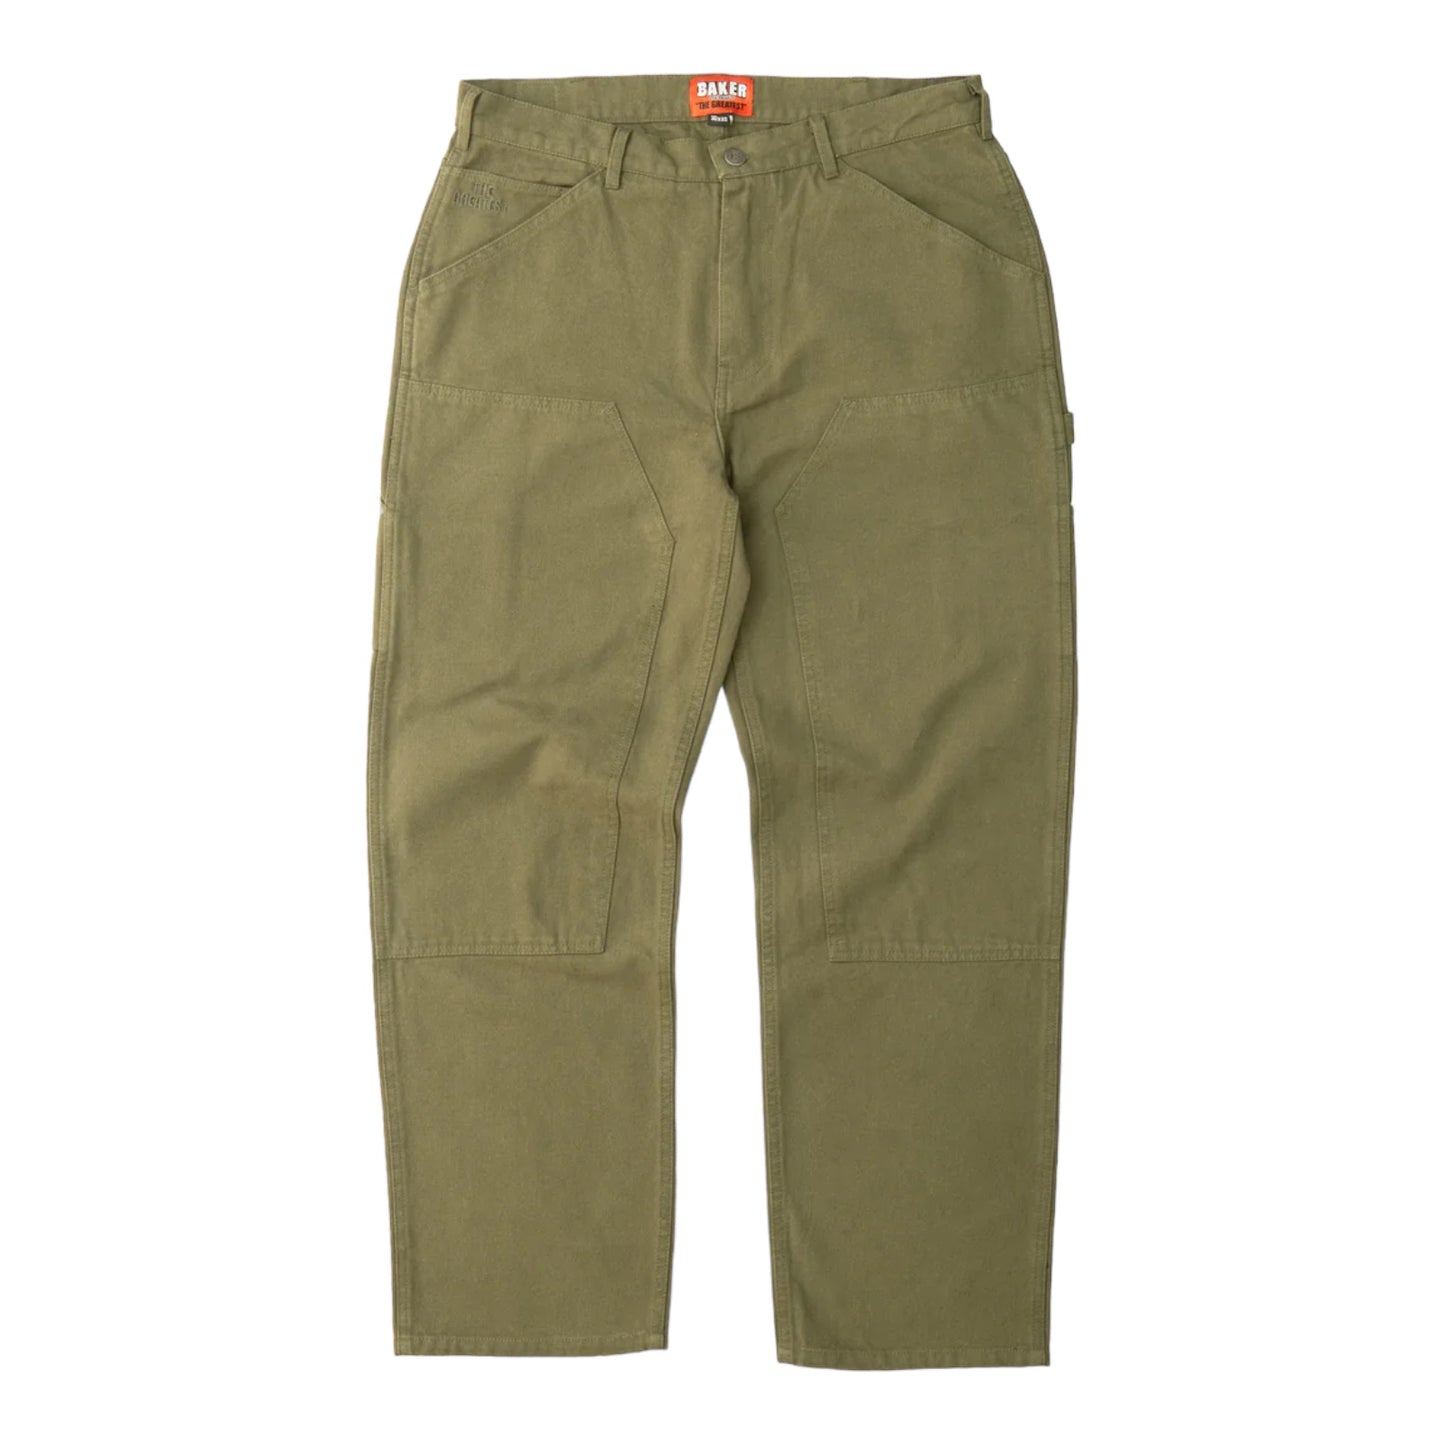 Moss Green Double Knee Pants.  (Front View)